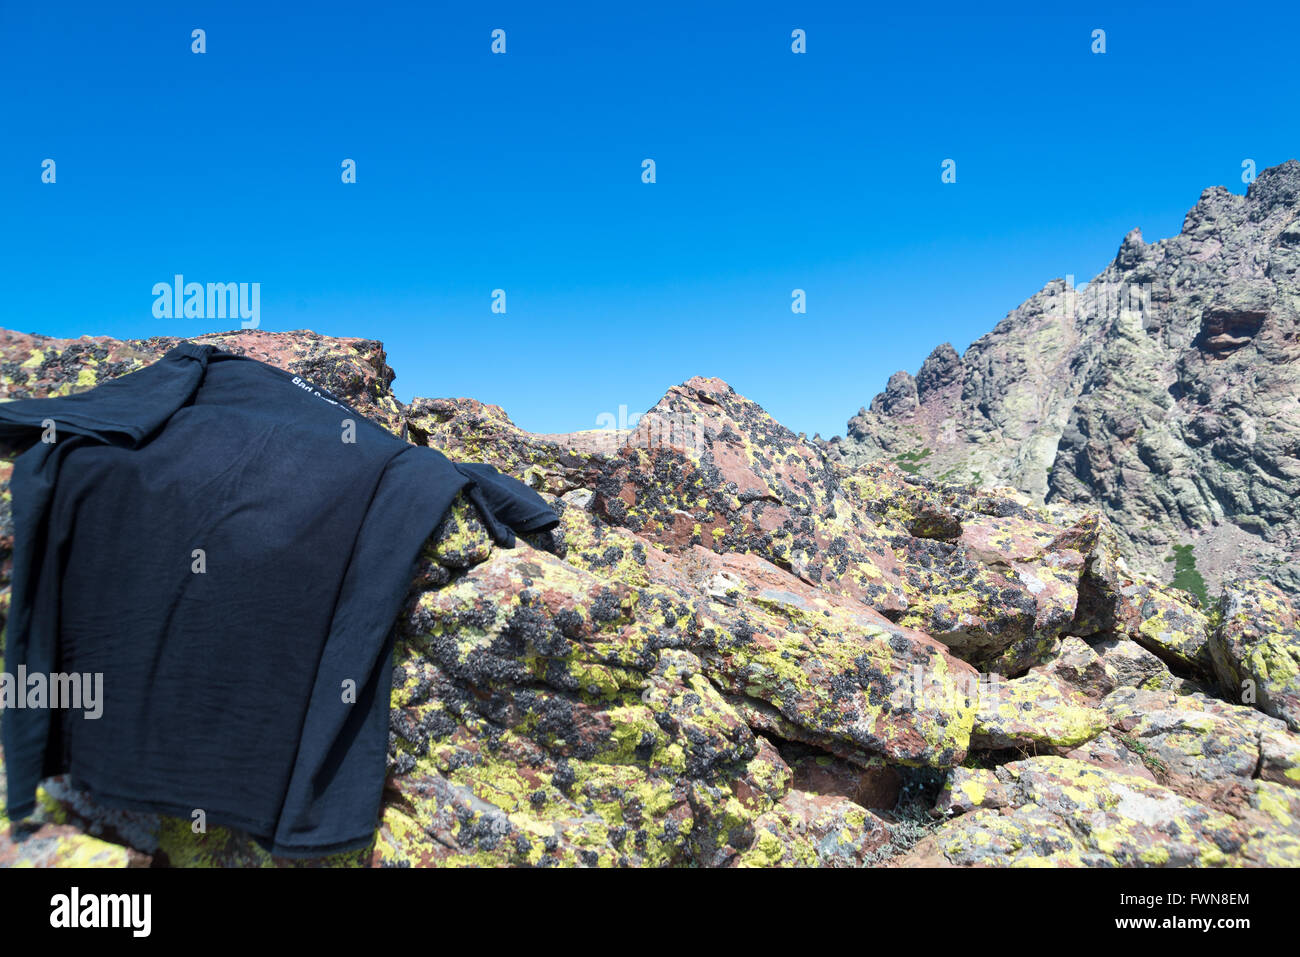 Waiting for the t-shirt to dry at the sun on the Monte Cinto, the highest mountain of Corsica, France Stock Photo